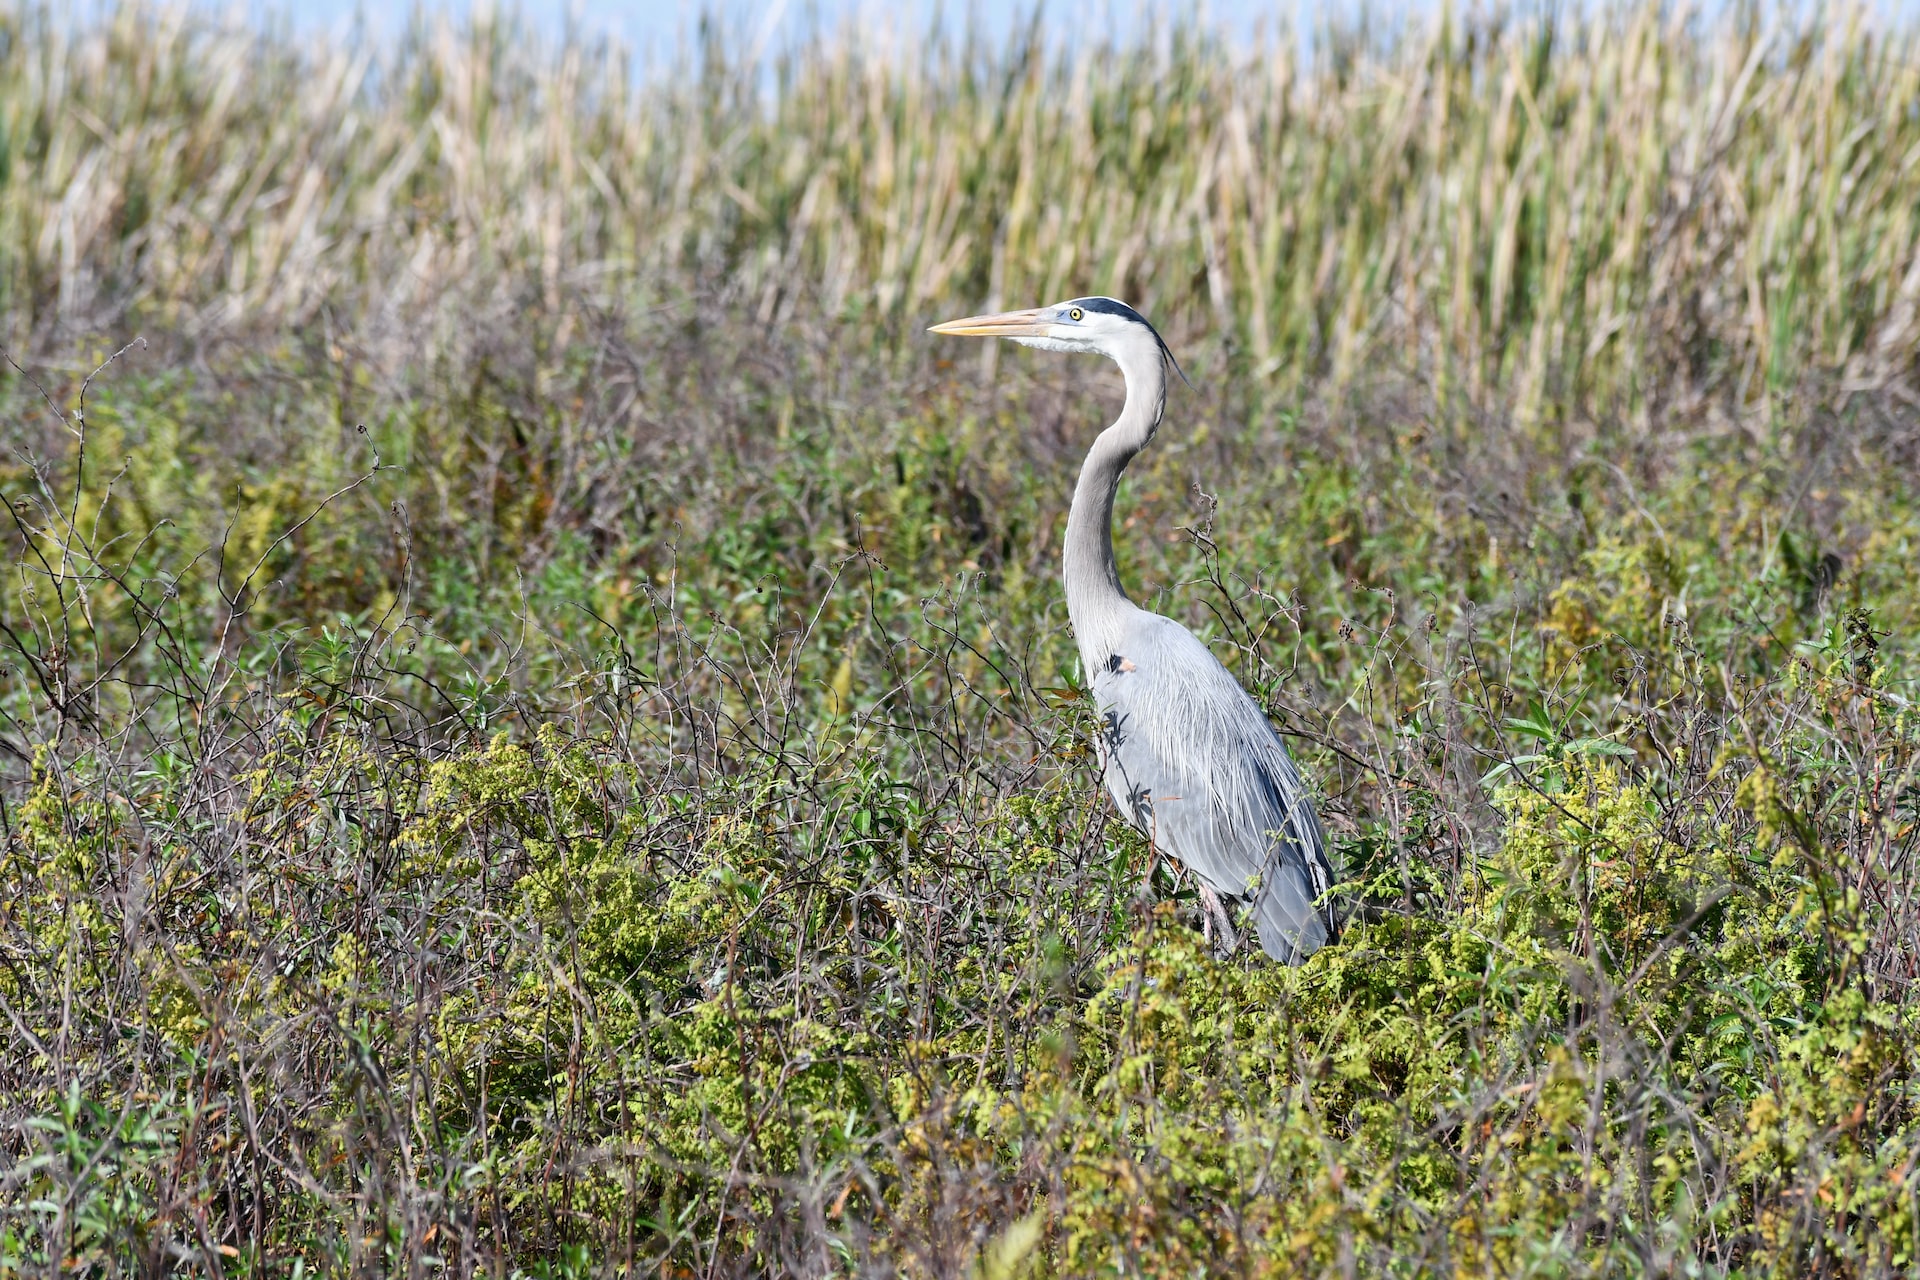 A blue heron standing in the Florida marsh.